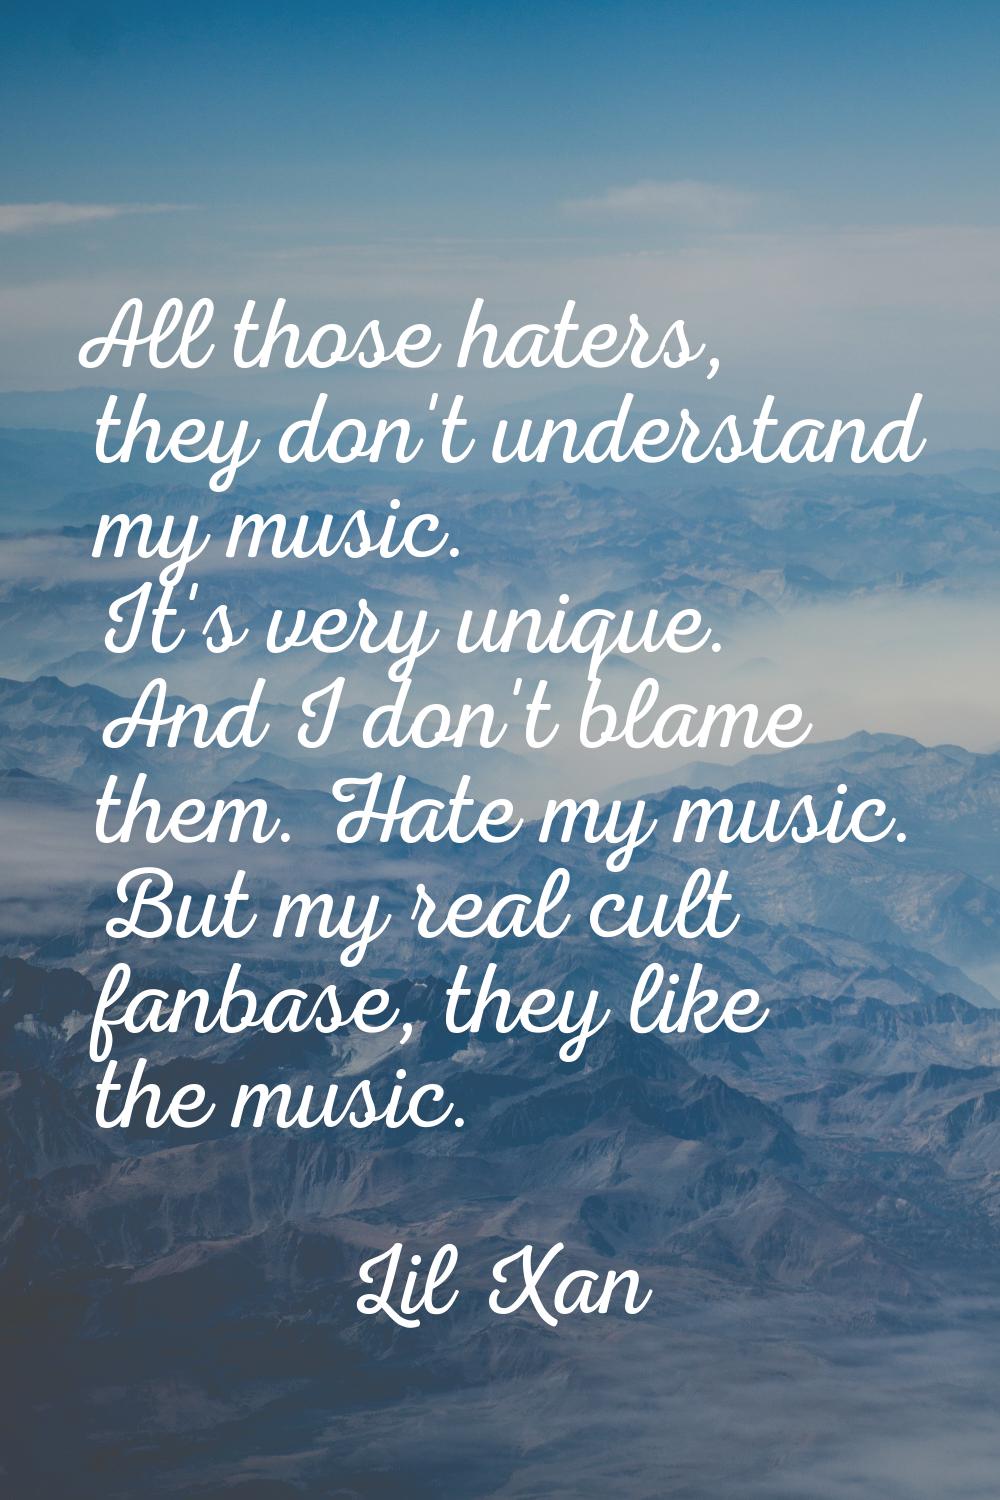 All those haters, they don't understand my music. It's very unique. And I don't blame them. Hate my